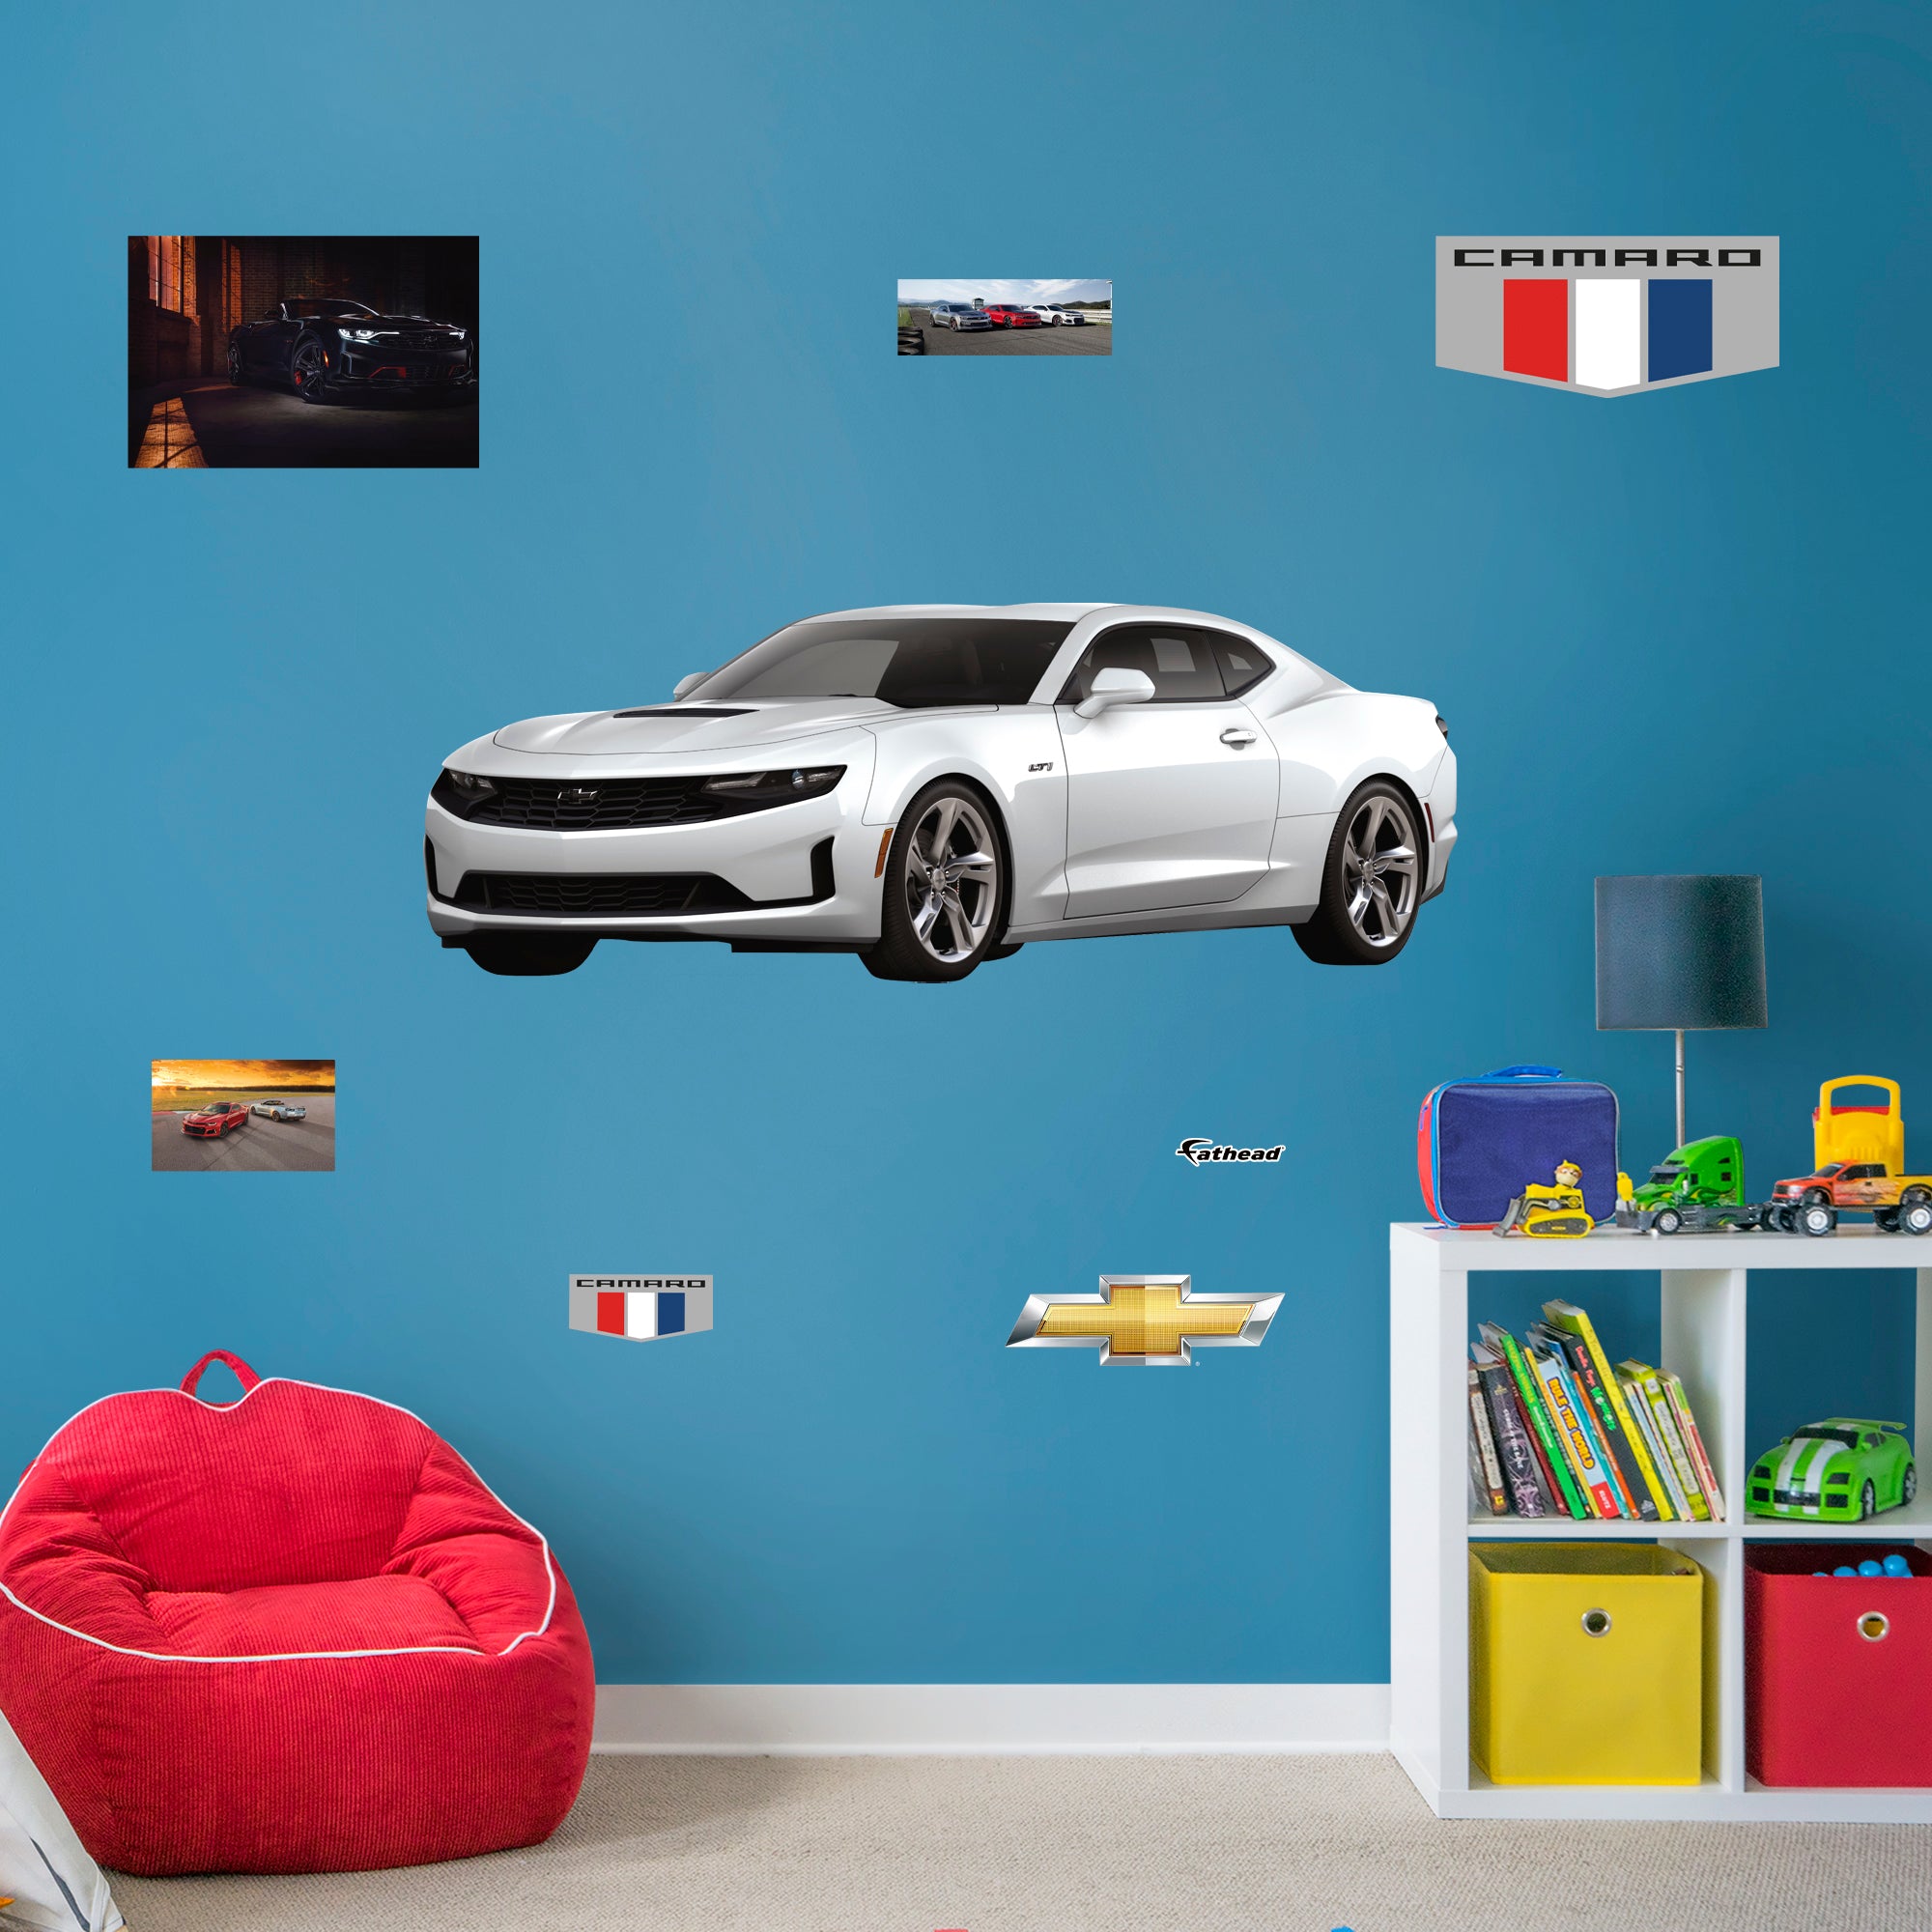 Chevrolet White Camaro: Officially Licensed GM Removable Wall Decal Life-Size + 7 Decals by Fathead | Vinyl